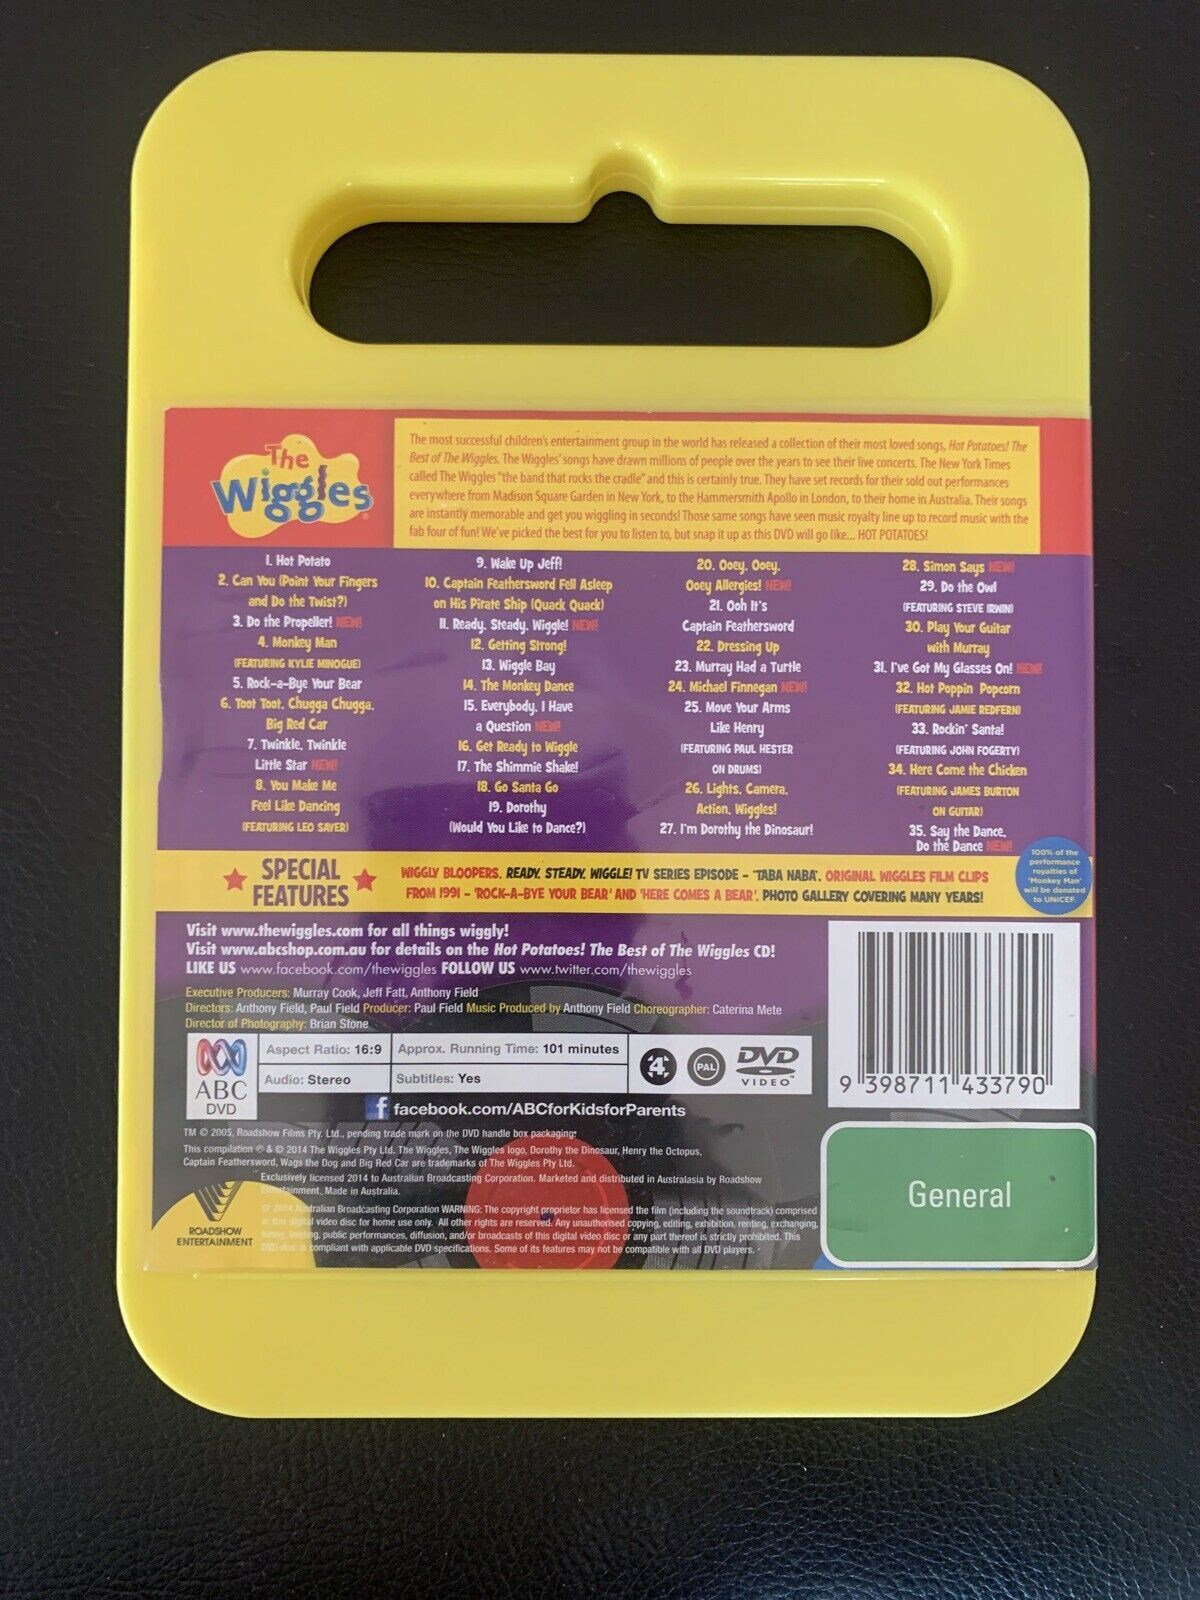 The Wiggles - The Hot Potatoes! - Best Of The Wiggles DVD Region 4